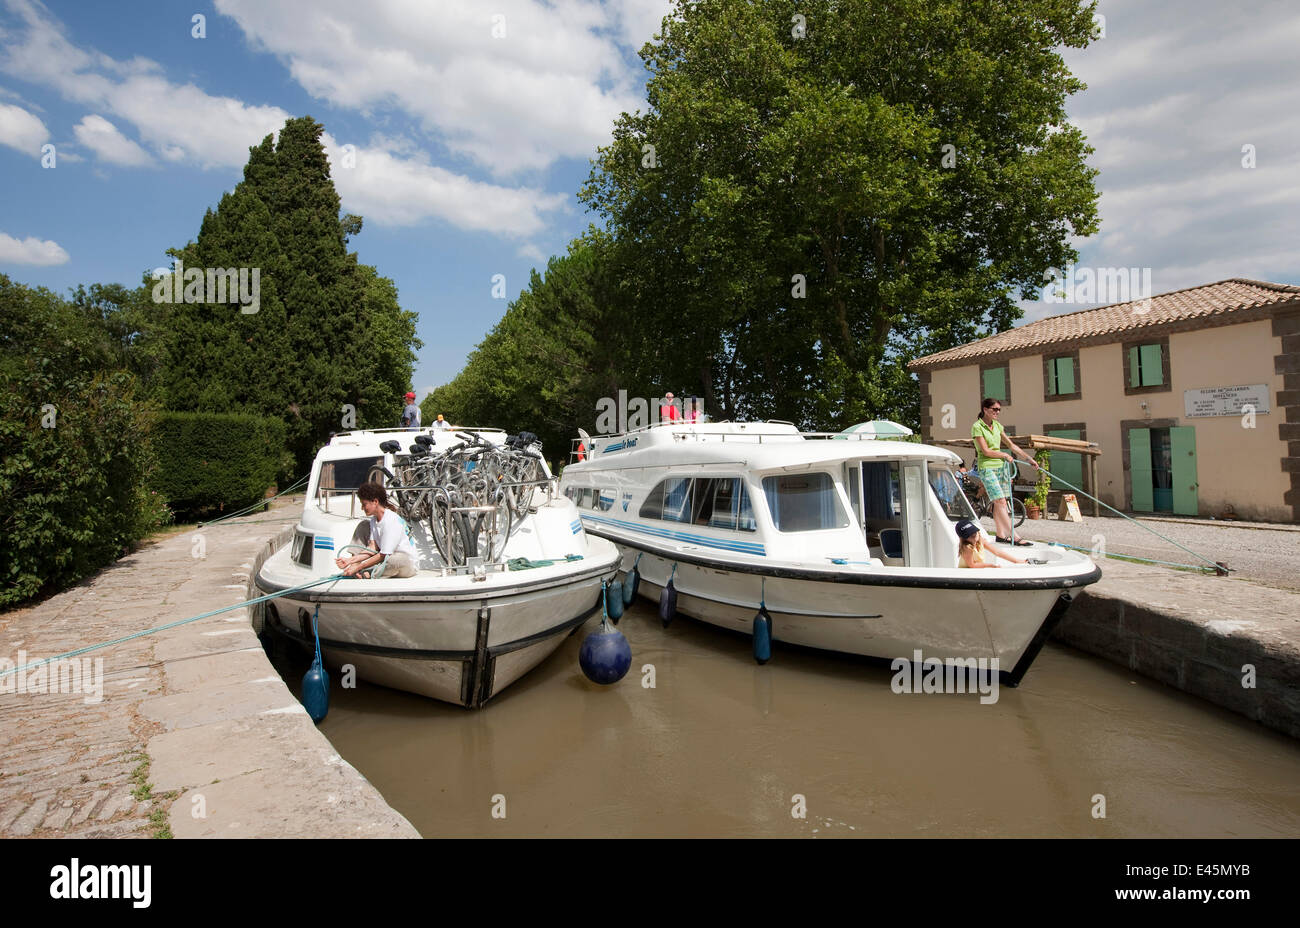 Two boats moored on the Canal Du Midi, Pechlairier, southern France. July 2009. Model and property released. Stock Photo